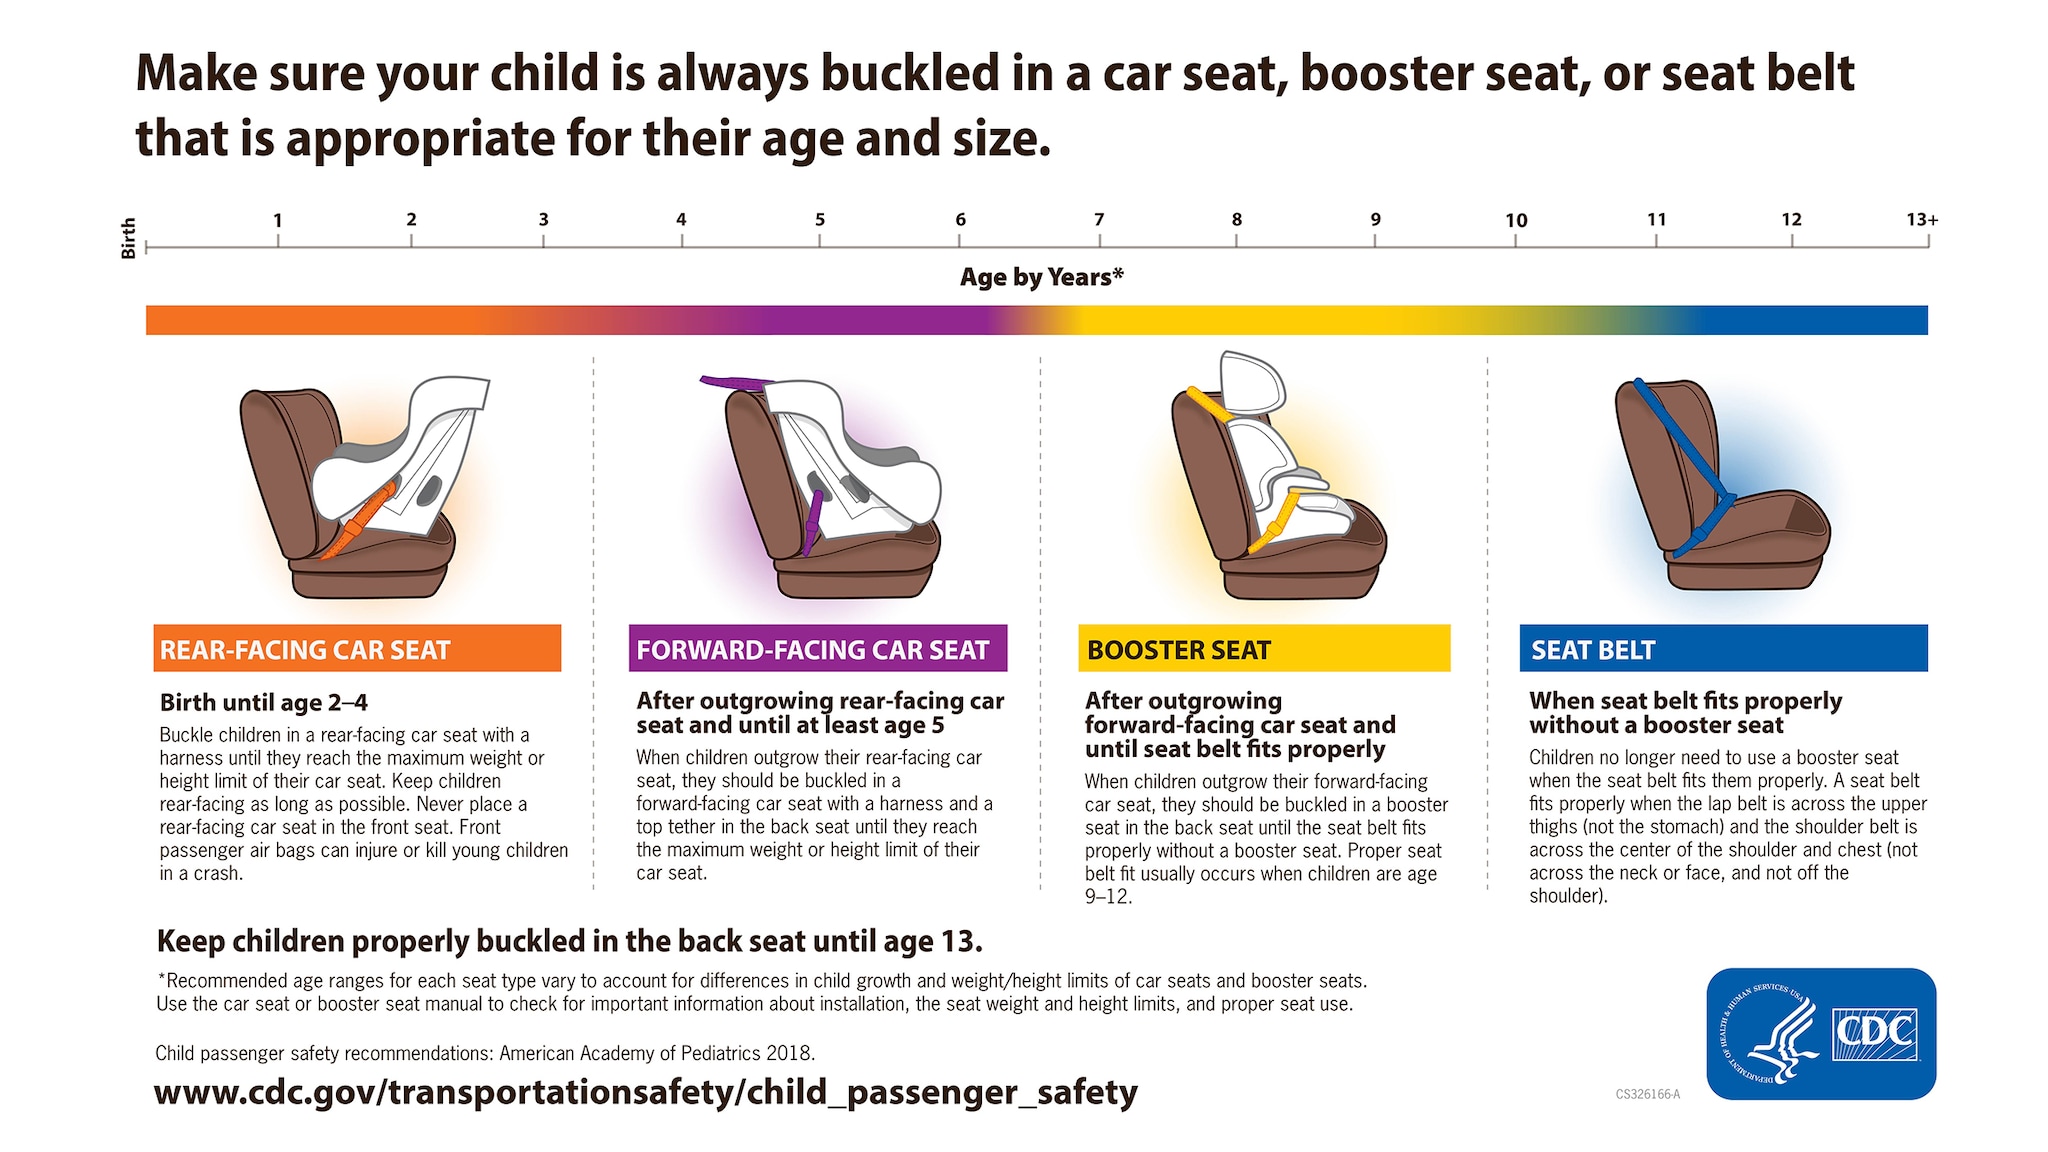 https://www.cdc.gov/transportationsafety/images/child_passenger_safety/21_326166_A_Hull_Restraints_2500x1406.png?_=52746